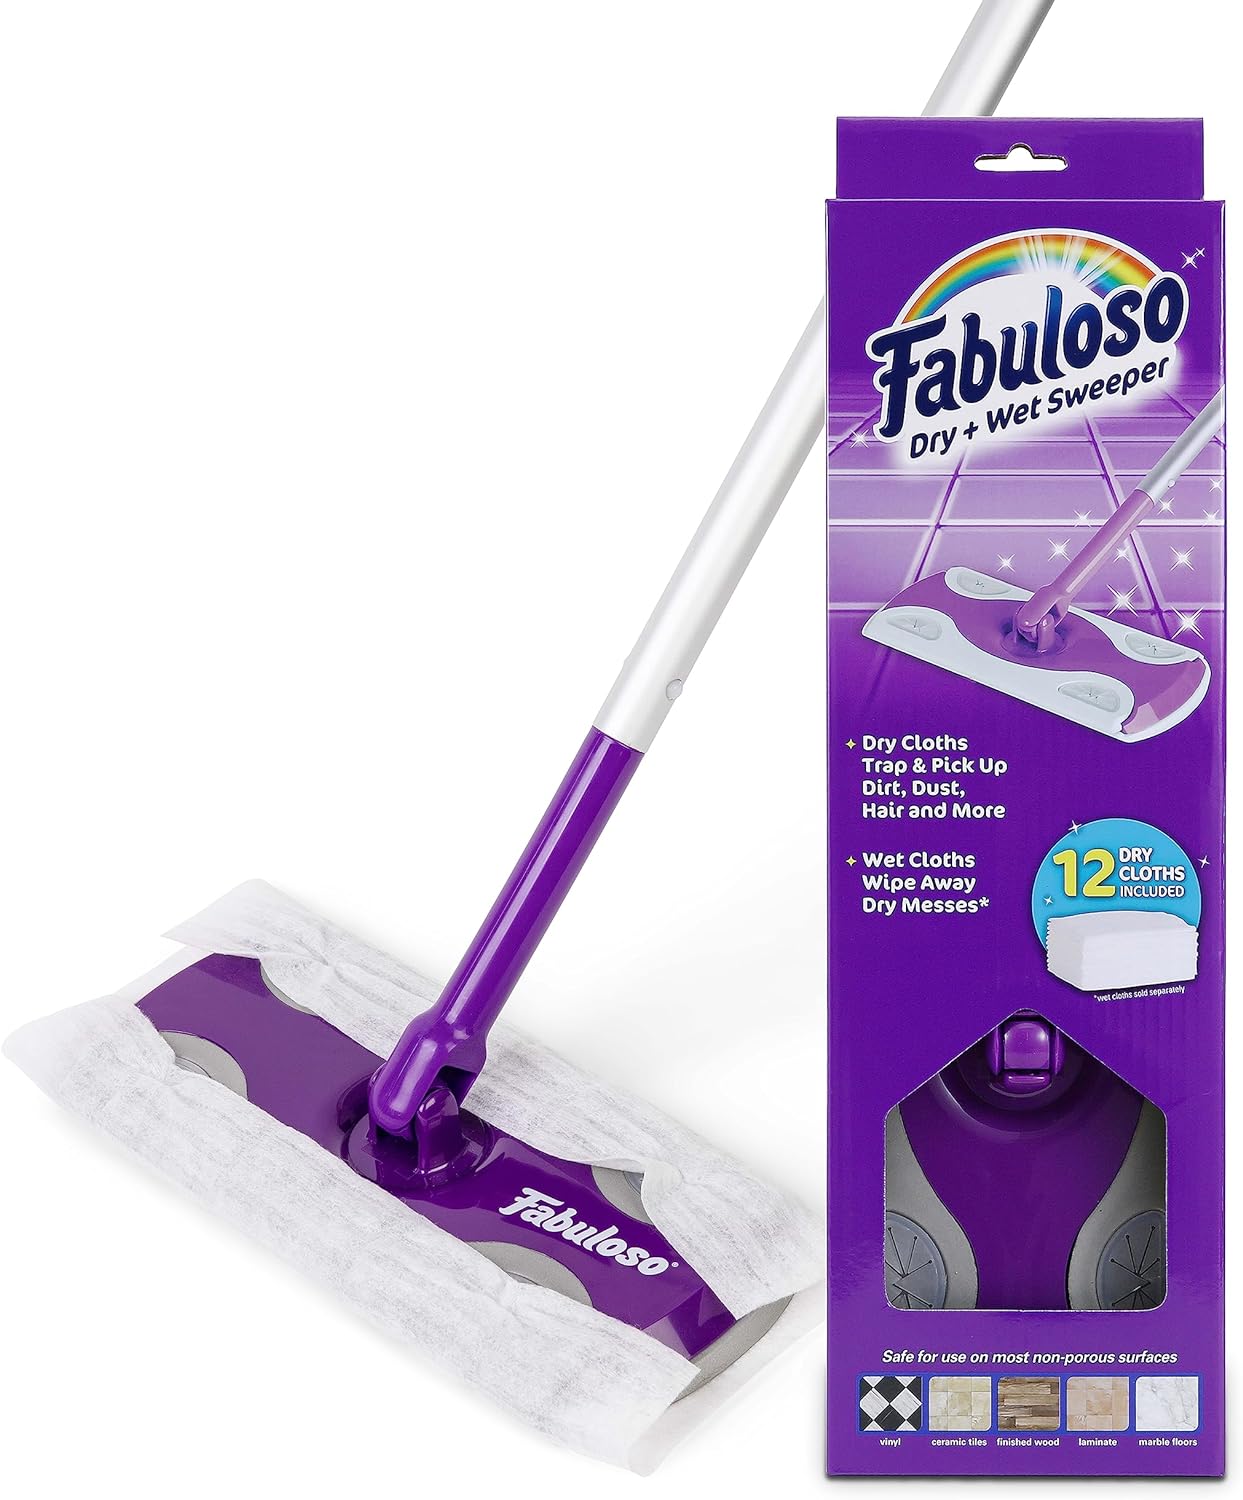 I buy Fabuloso cleaner on occasion because my maintenance engineer's wife loves the smell of the purple one, but I never thought much of buying anything else from this brand. I usually go for the same brand as my dry/wet kit. But these were on sale for a good price, and I was curious if they would fit. I was delighted to find out they did. Now I have a new set to use as a comparison price when Swiffer dry wipes are higher in price. I have found that they are CONSTANTLY out of stock in stores, so